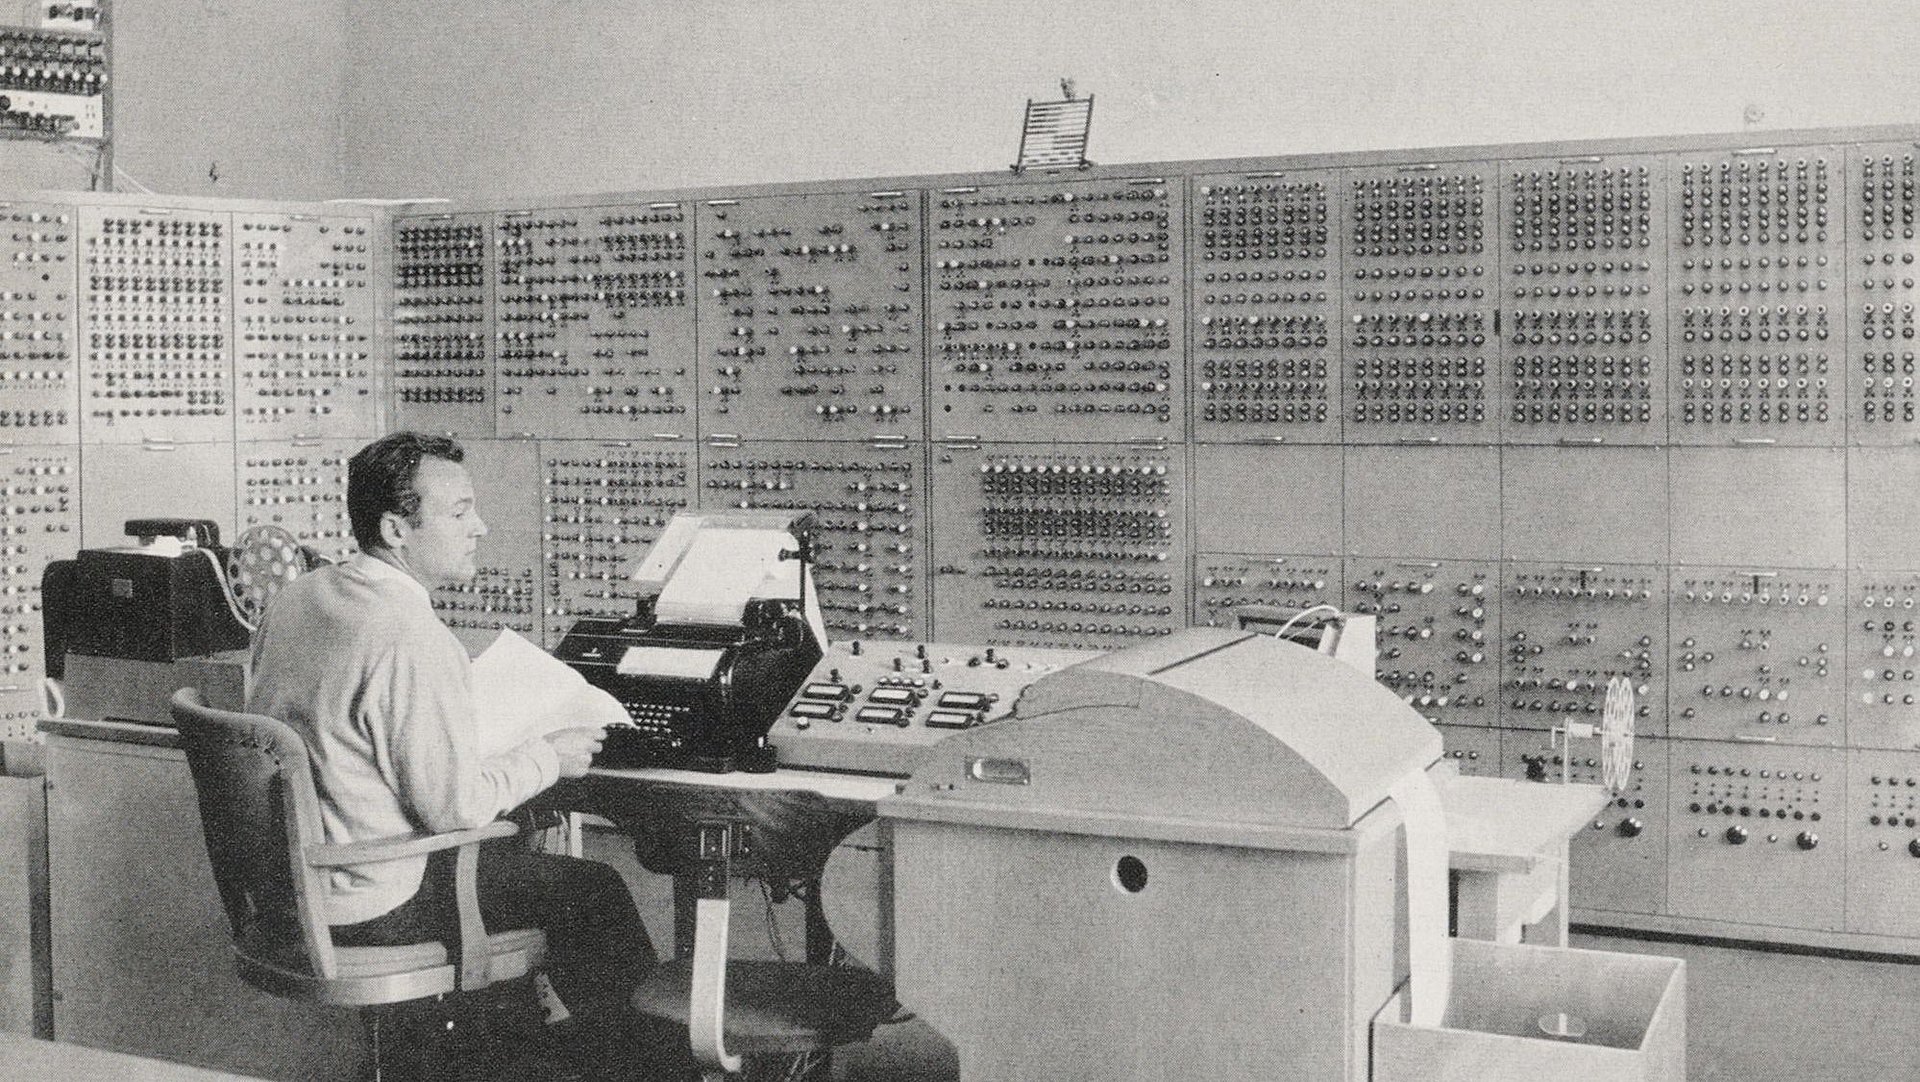 Historical image of the Input station of the Program-Controlled Electronic Computing Machine Munich (PERM).